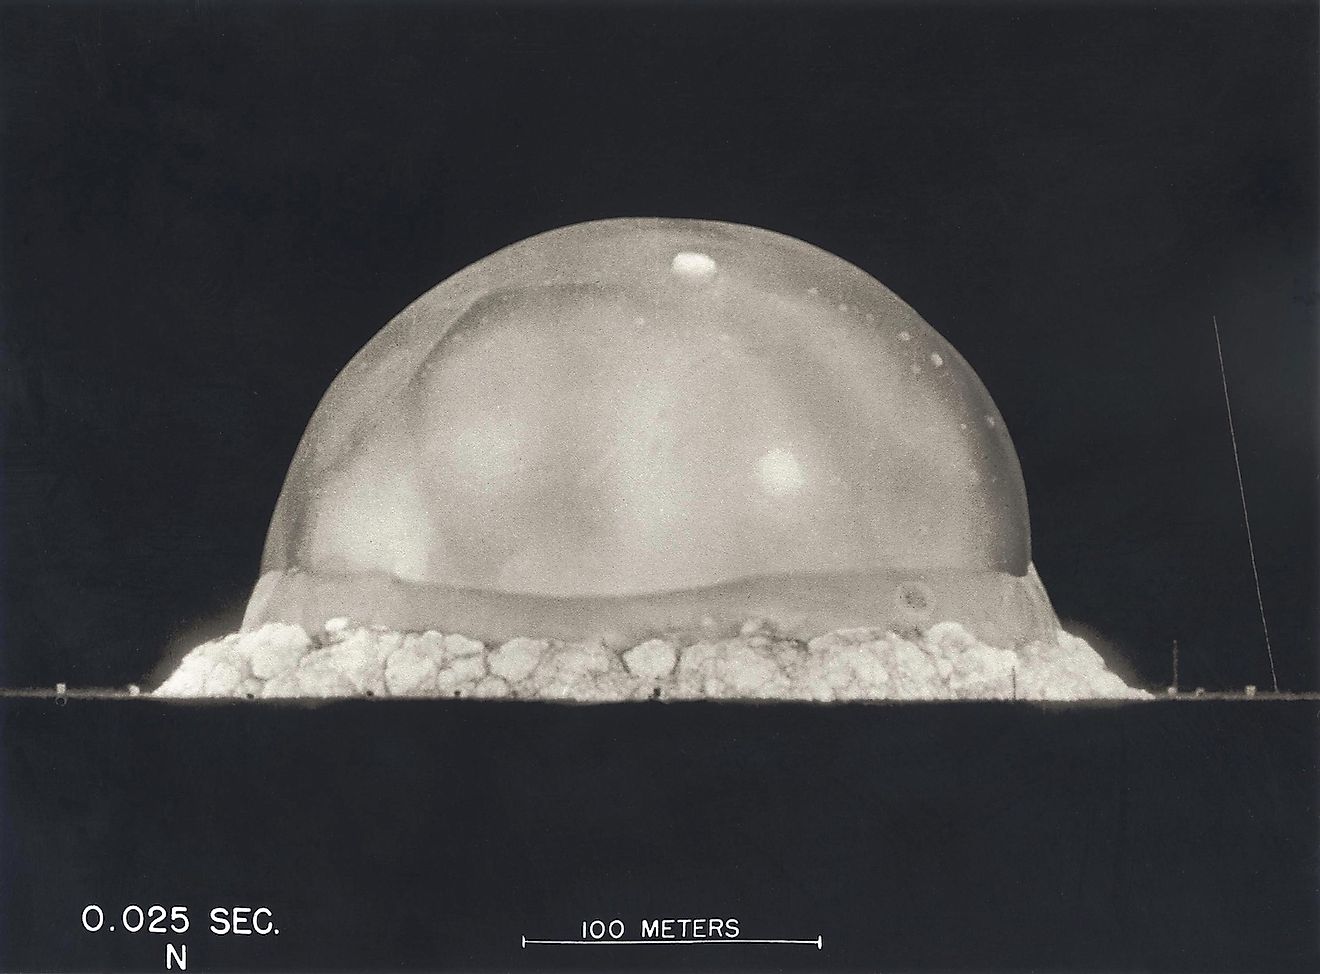 Photograph taken at .025 seconds after the Trinity initial detonation shows a plasma dome. Manhattan Project, World War 2. Alamogordo, New Mexico. Image credit: Everett Historical/Shutterstock.com